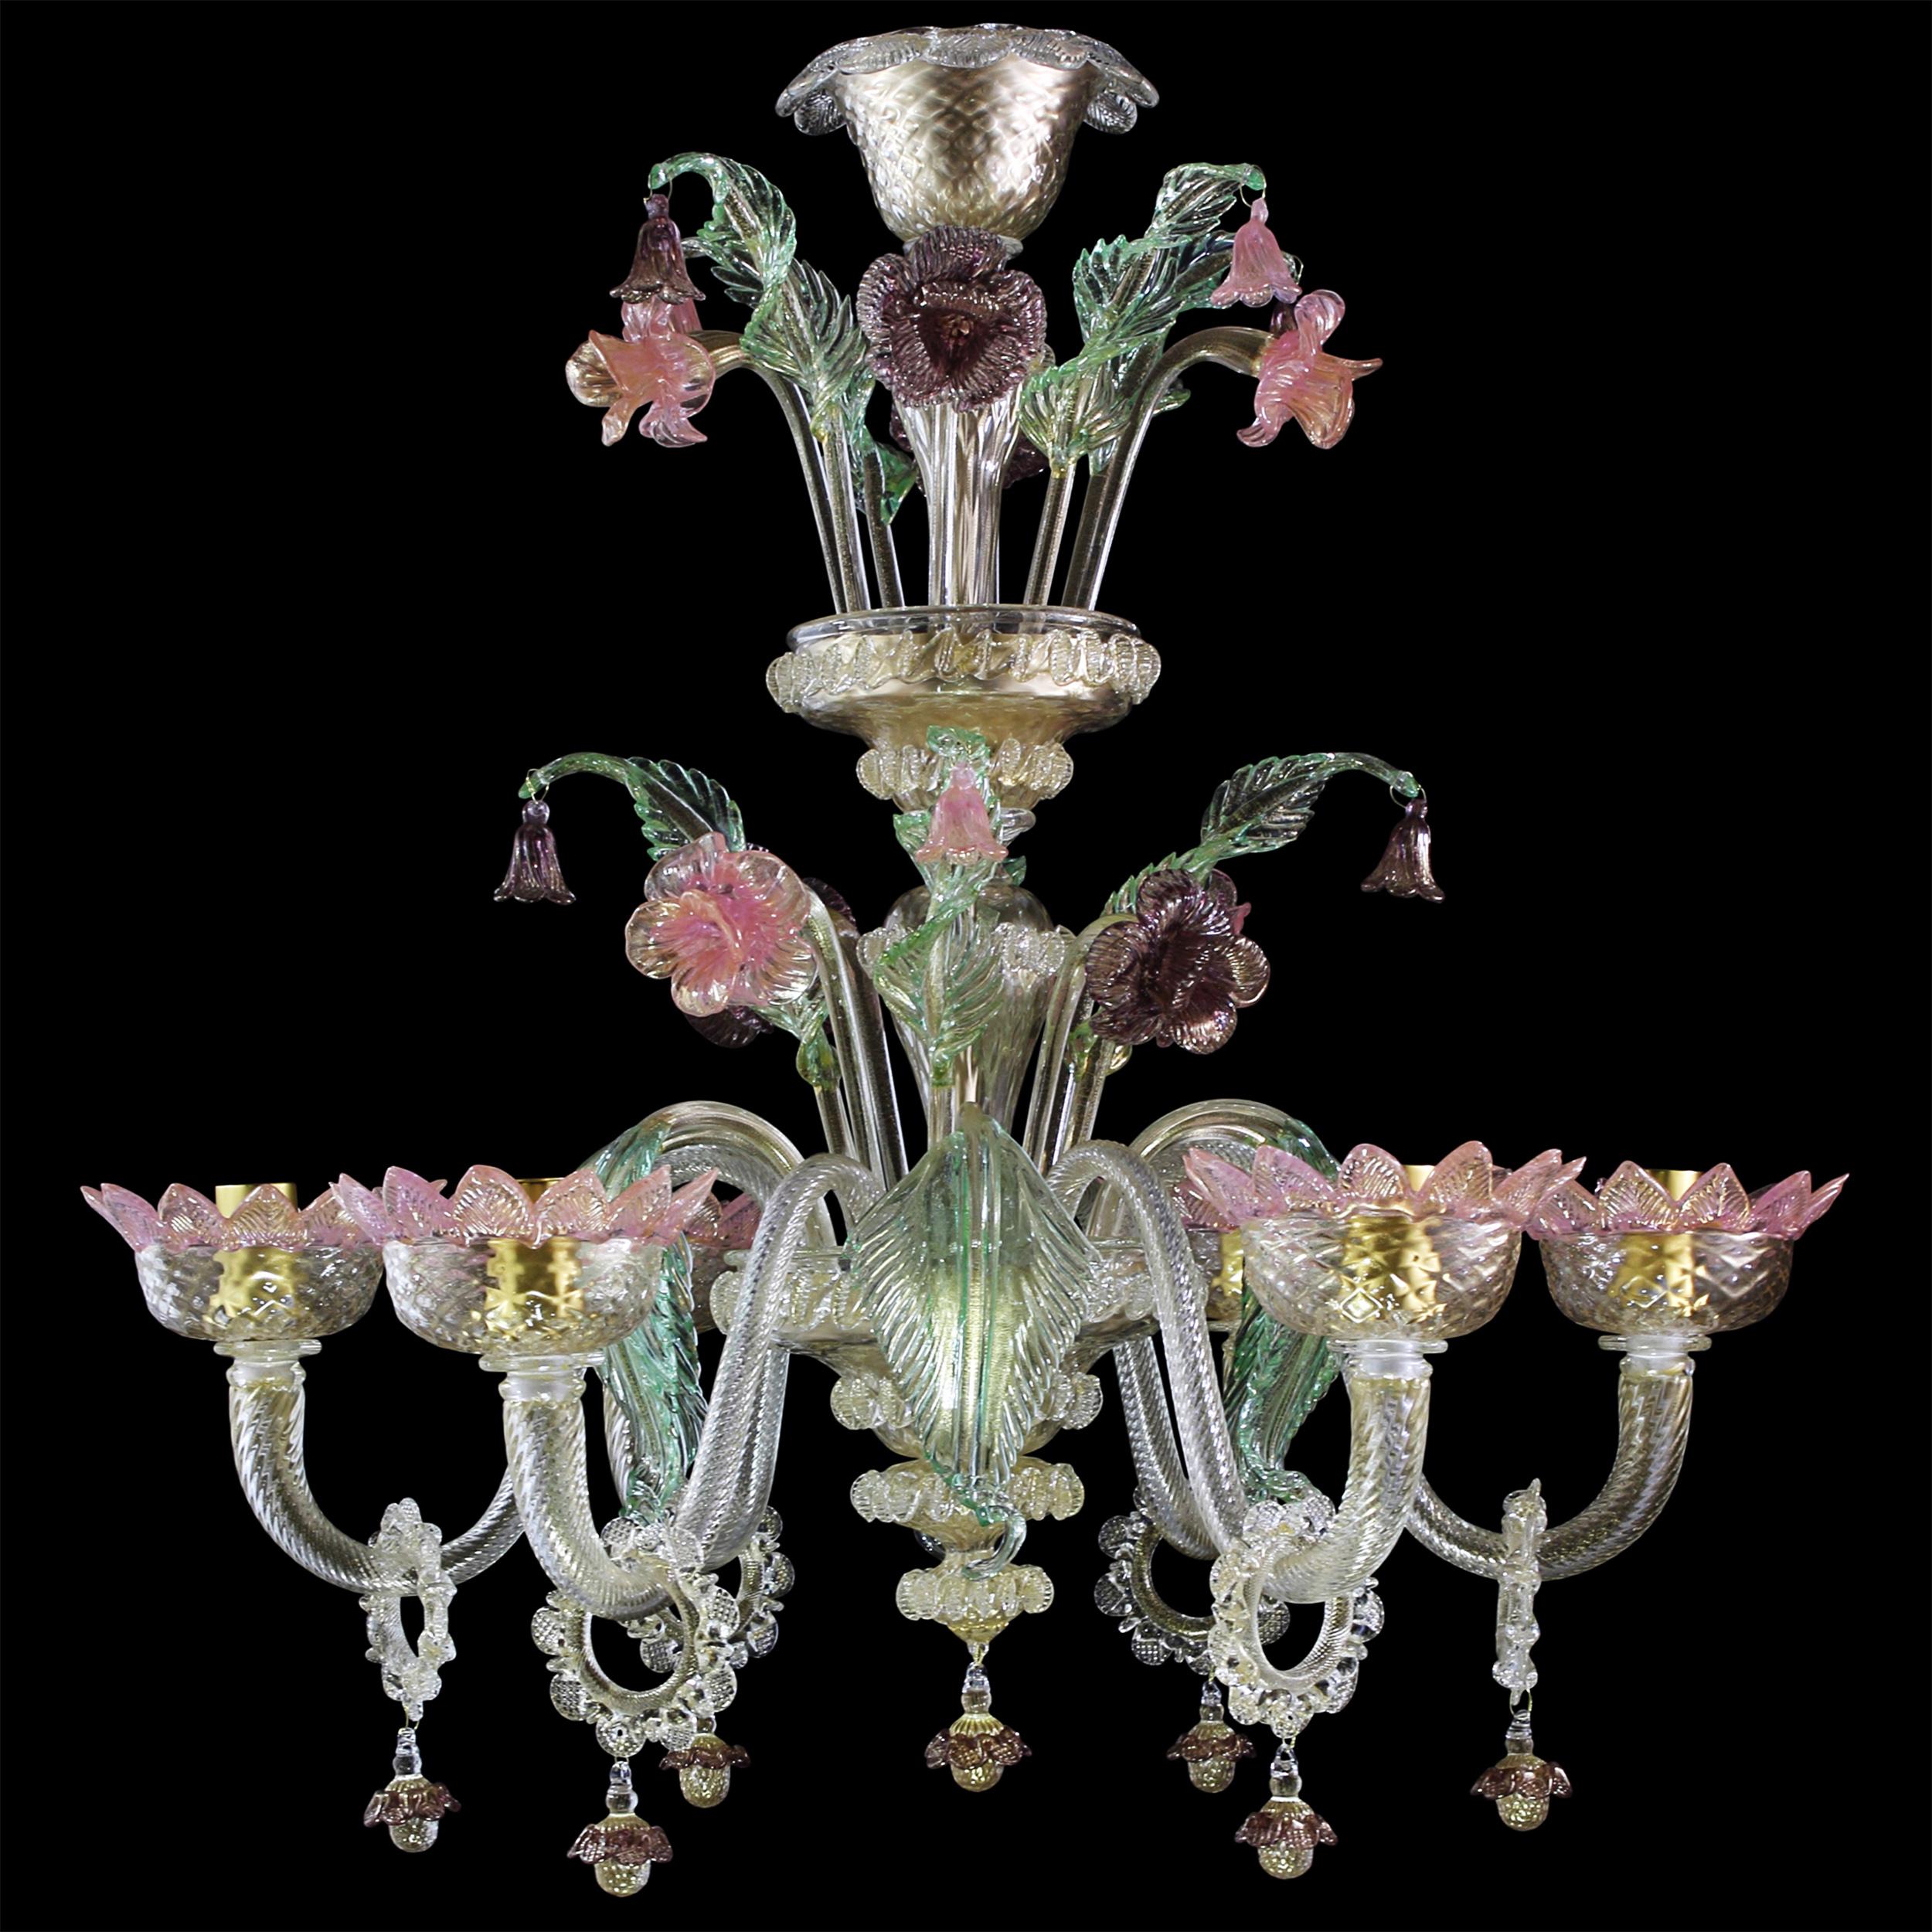 This chandelier has 6 Arms in gold Glass while the details are in pink, green and amethyst.
The handcrafted soul of our lighting products is reinvented every time we start a new project, when we are confronted with technical requirements and